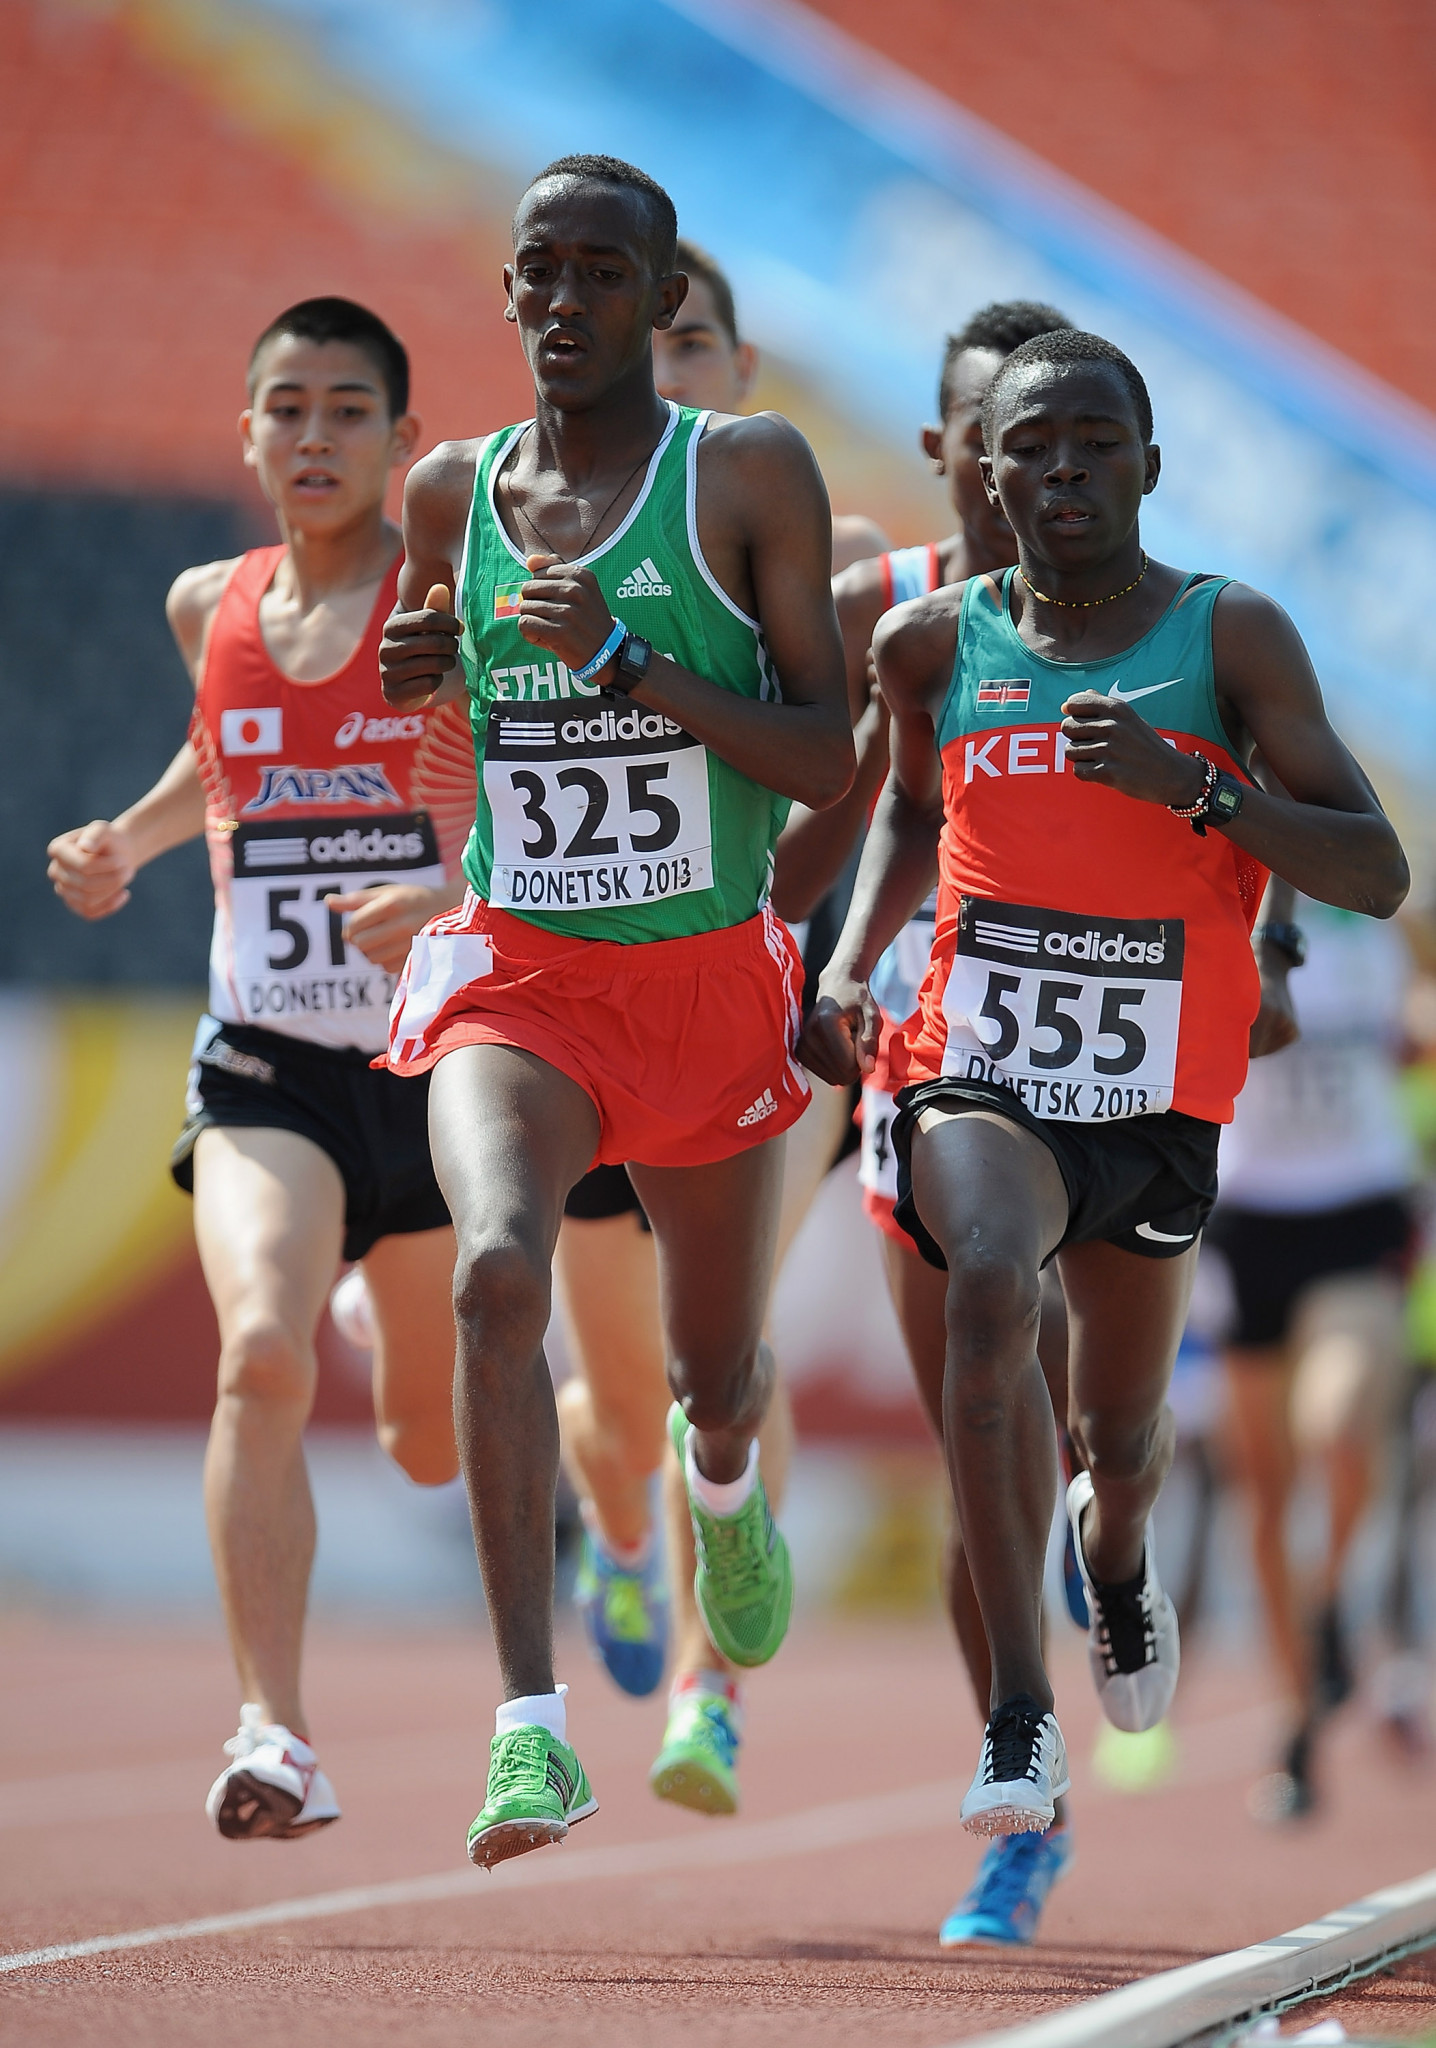 Tuemay and Tesfay secure Ethiopian double at World Athletics Cross Country Permit in Campaccio